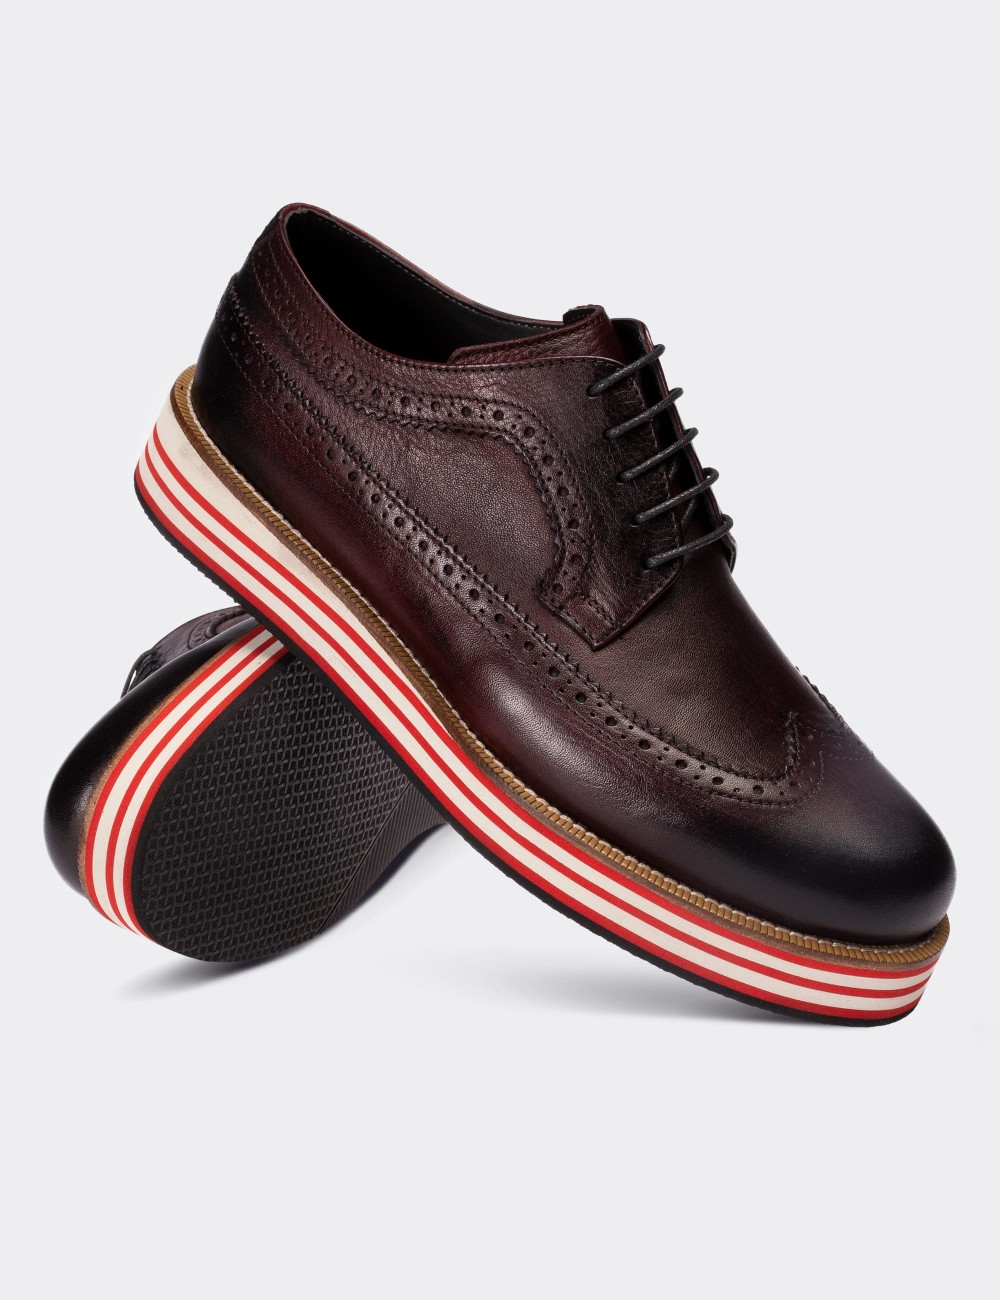 Burgundy  Leather Lace-up Shoes - 01293MBRDE15